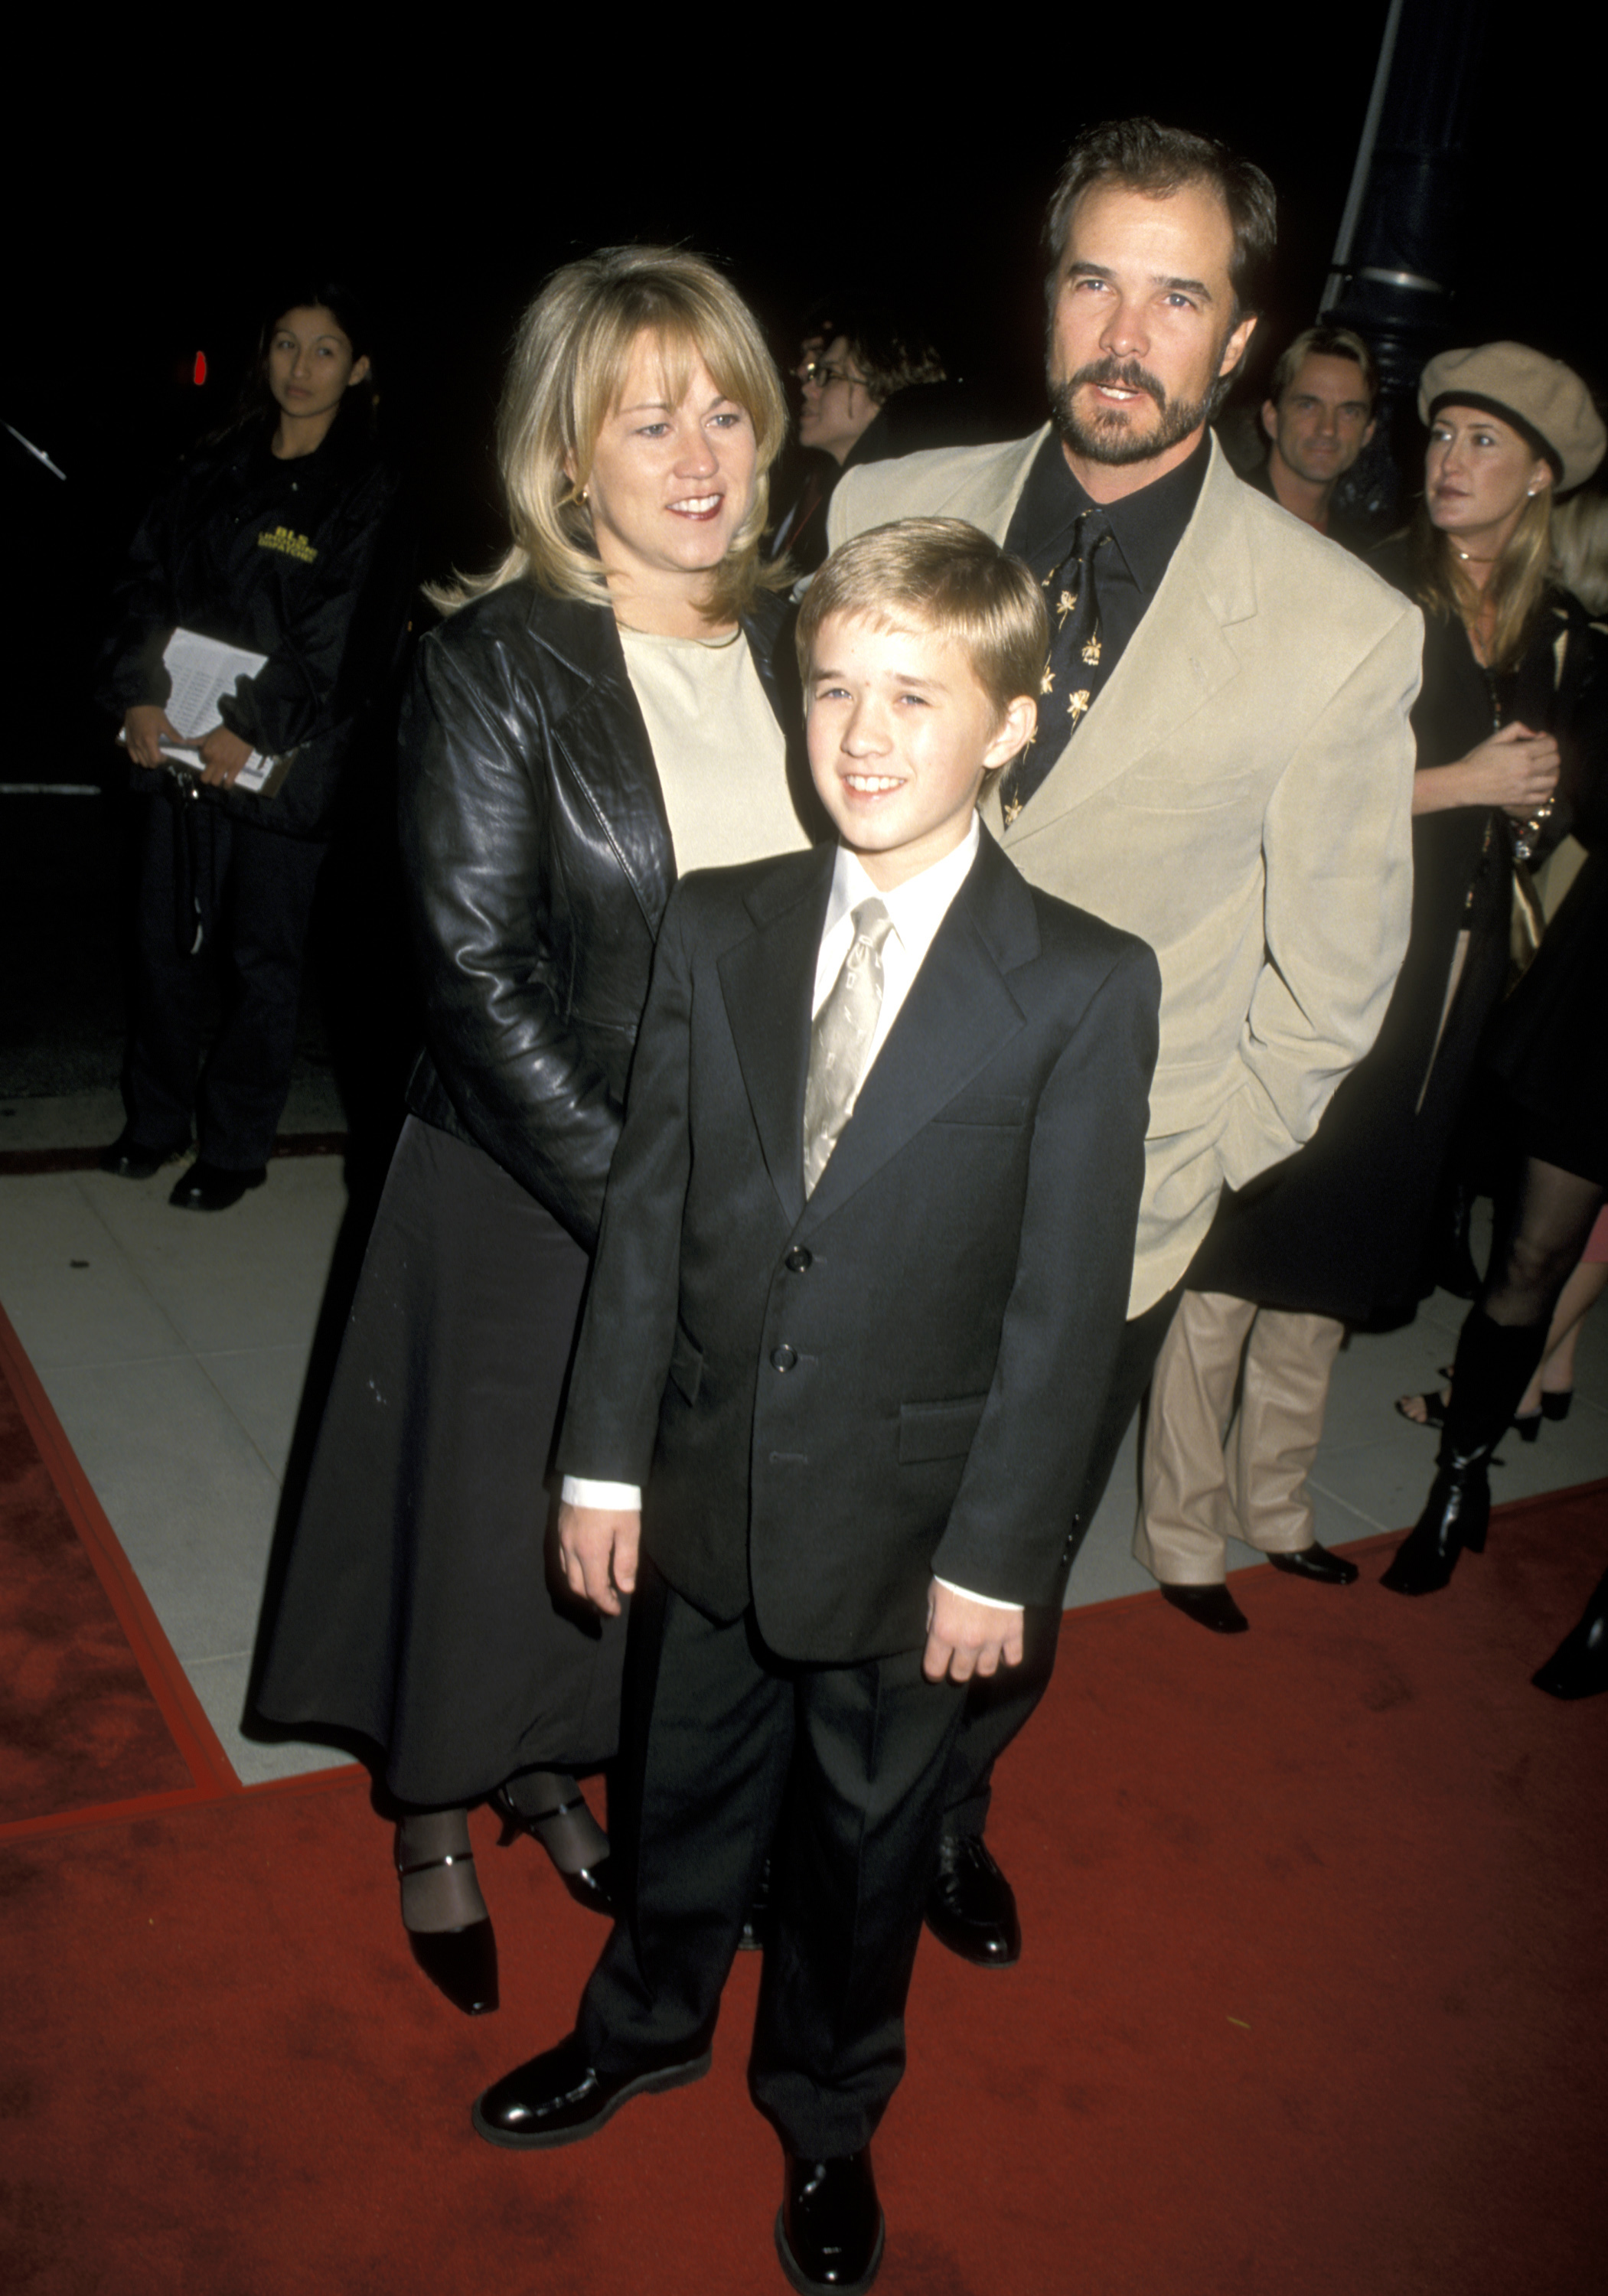 Theresa Osment, Haley Osment and Michael Osment at the Los Angeles premiere of "Pay It Forward," 2000 | Source: Getty Images